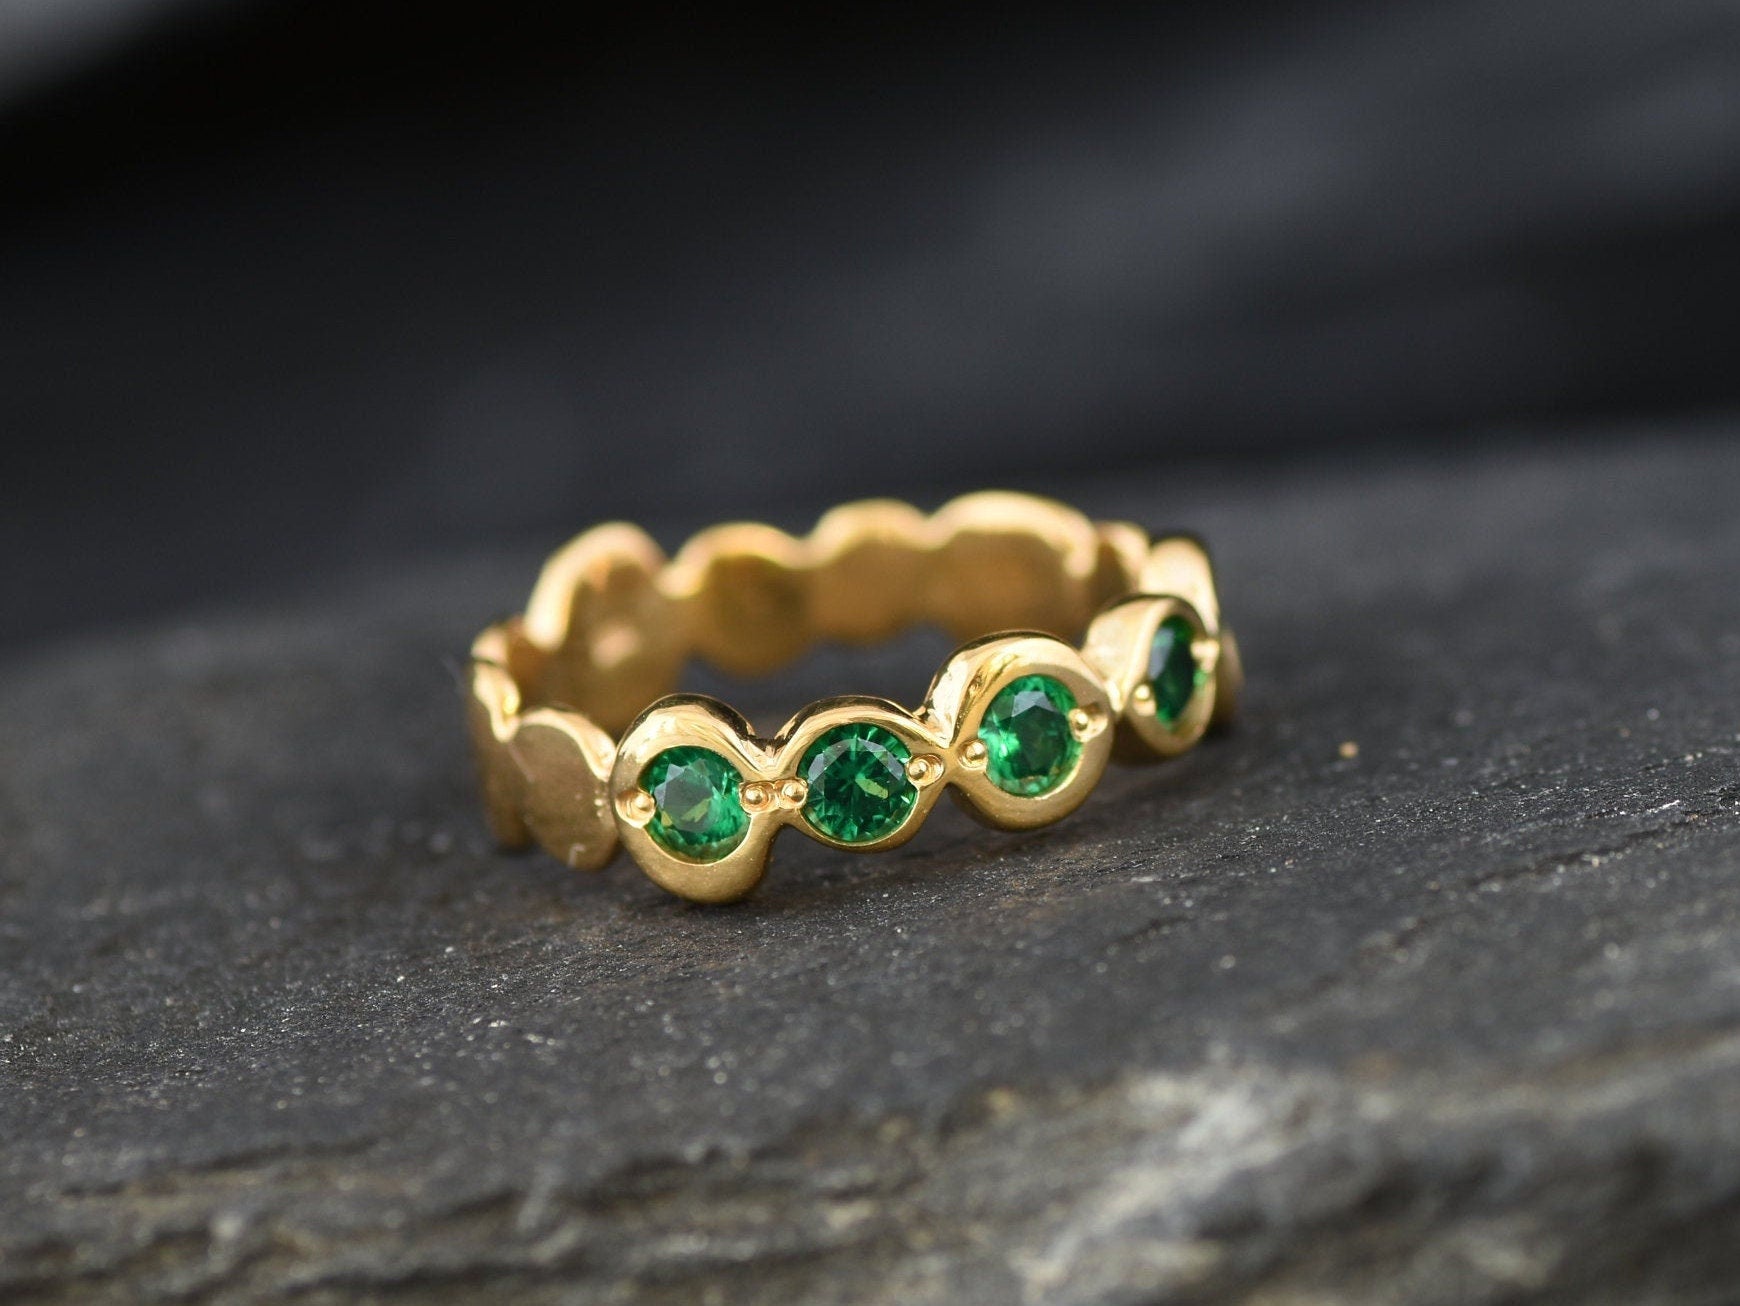 Gold Emerald Ring, Bubble Ring, Created Emerald, Gold Emerald Ring, Boho Ring, Emerald Ring, 18K Gold Ring, Green Emerald Ring, Gold Vermeil